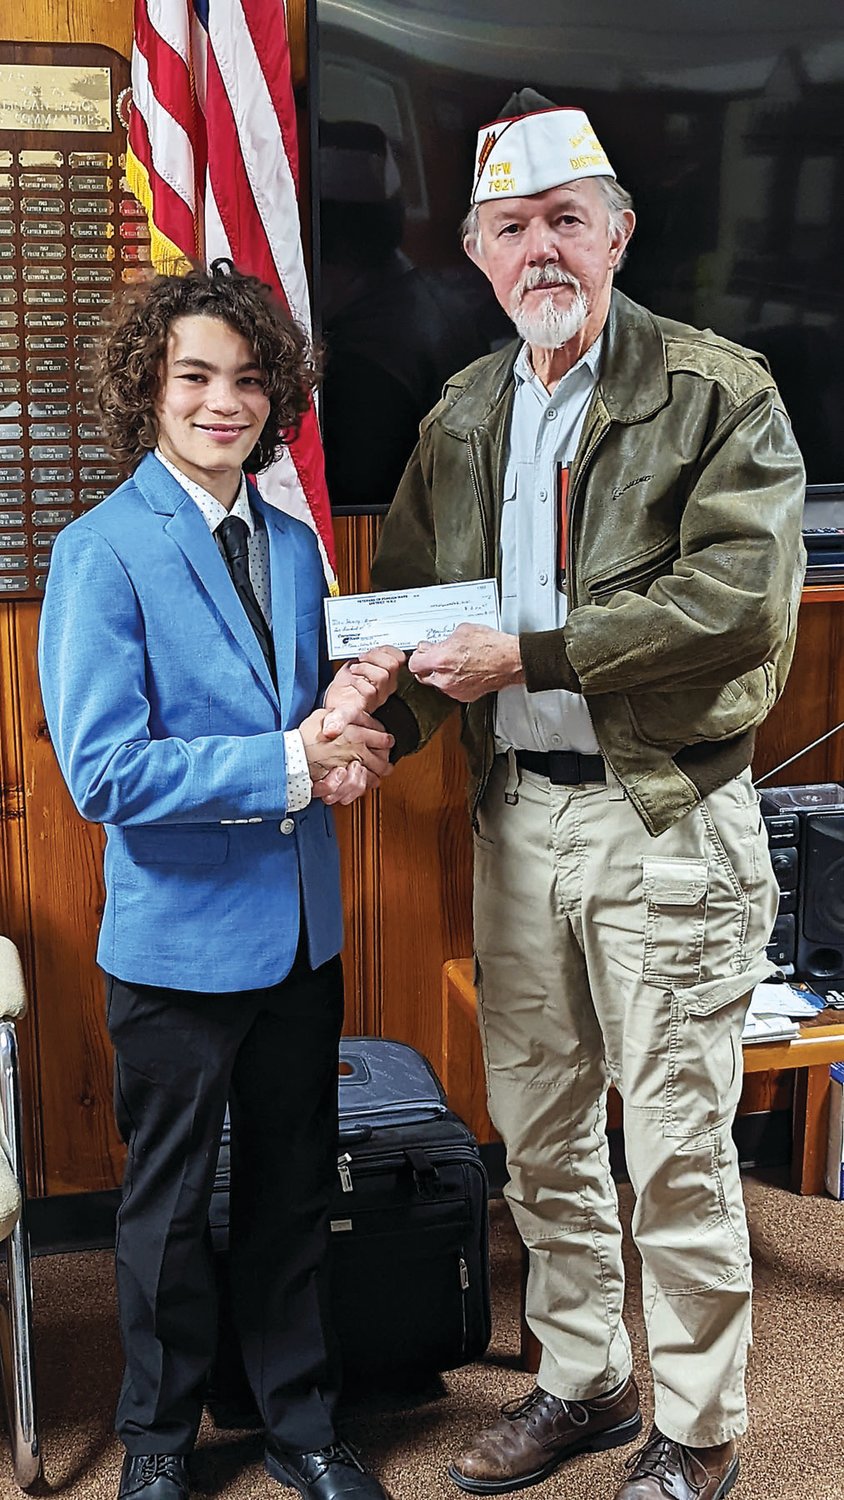 Henry Brusca, an eighth grader from Lambertville, N.J., is presented a check for $200 from the VFW District 19 Commander Georg Hambach.